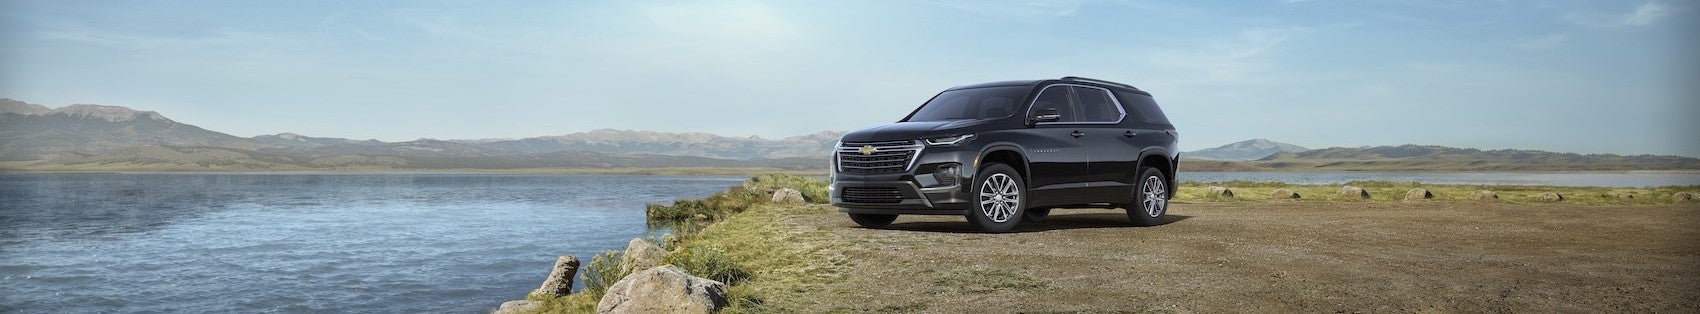 Chevy Traverse Reviews